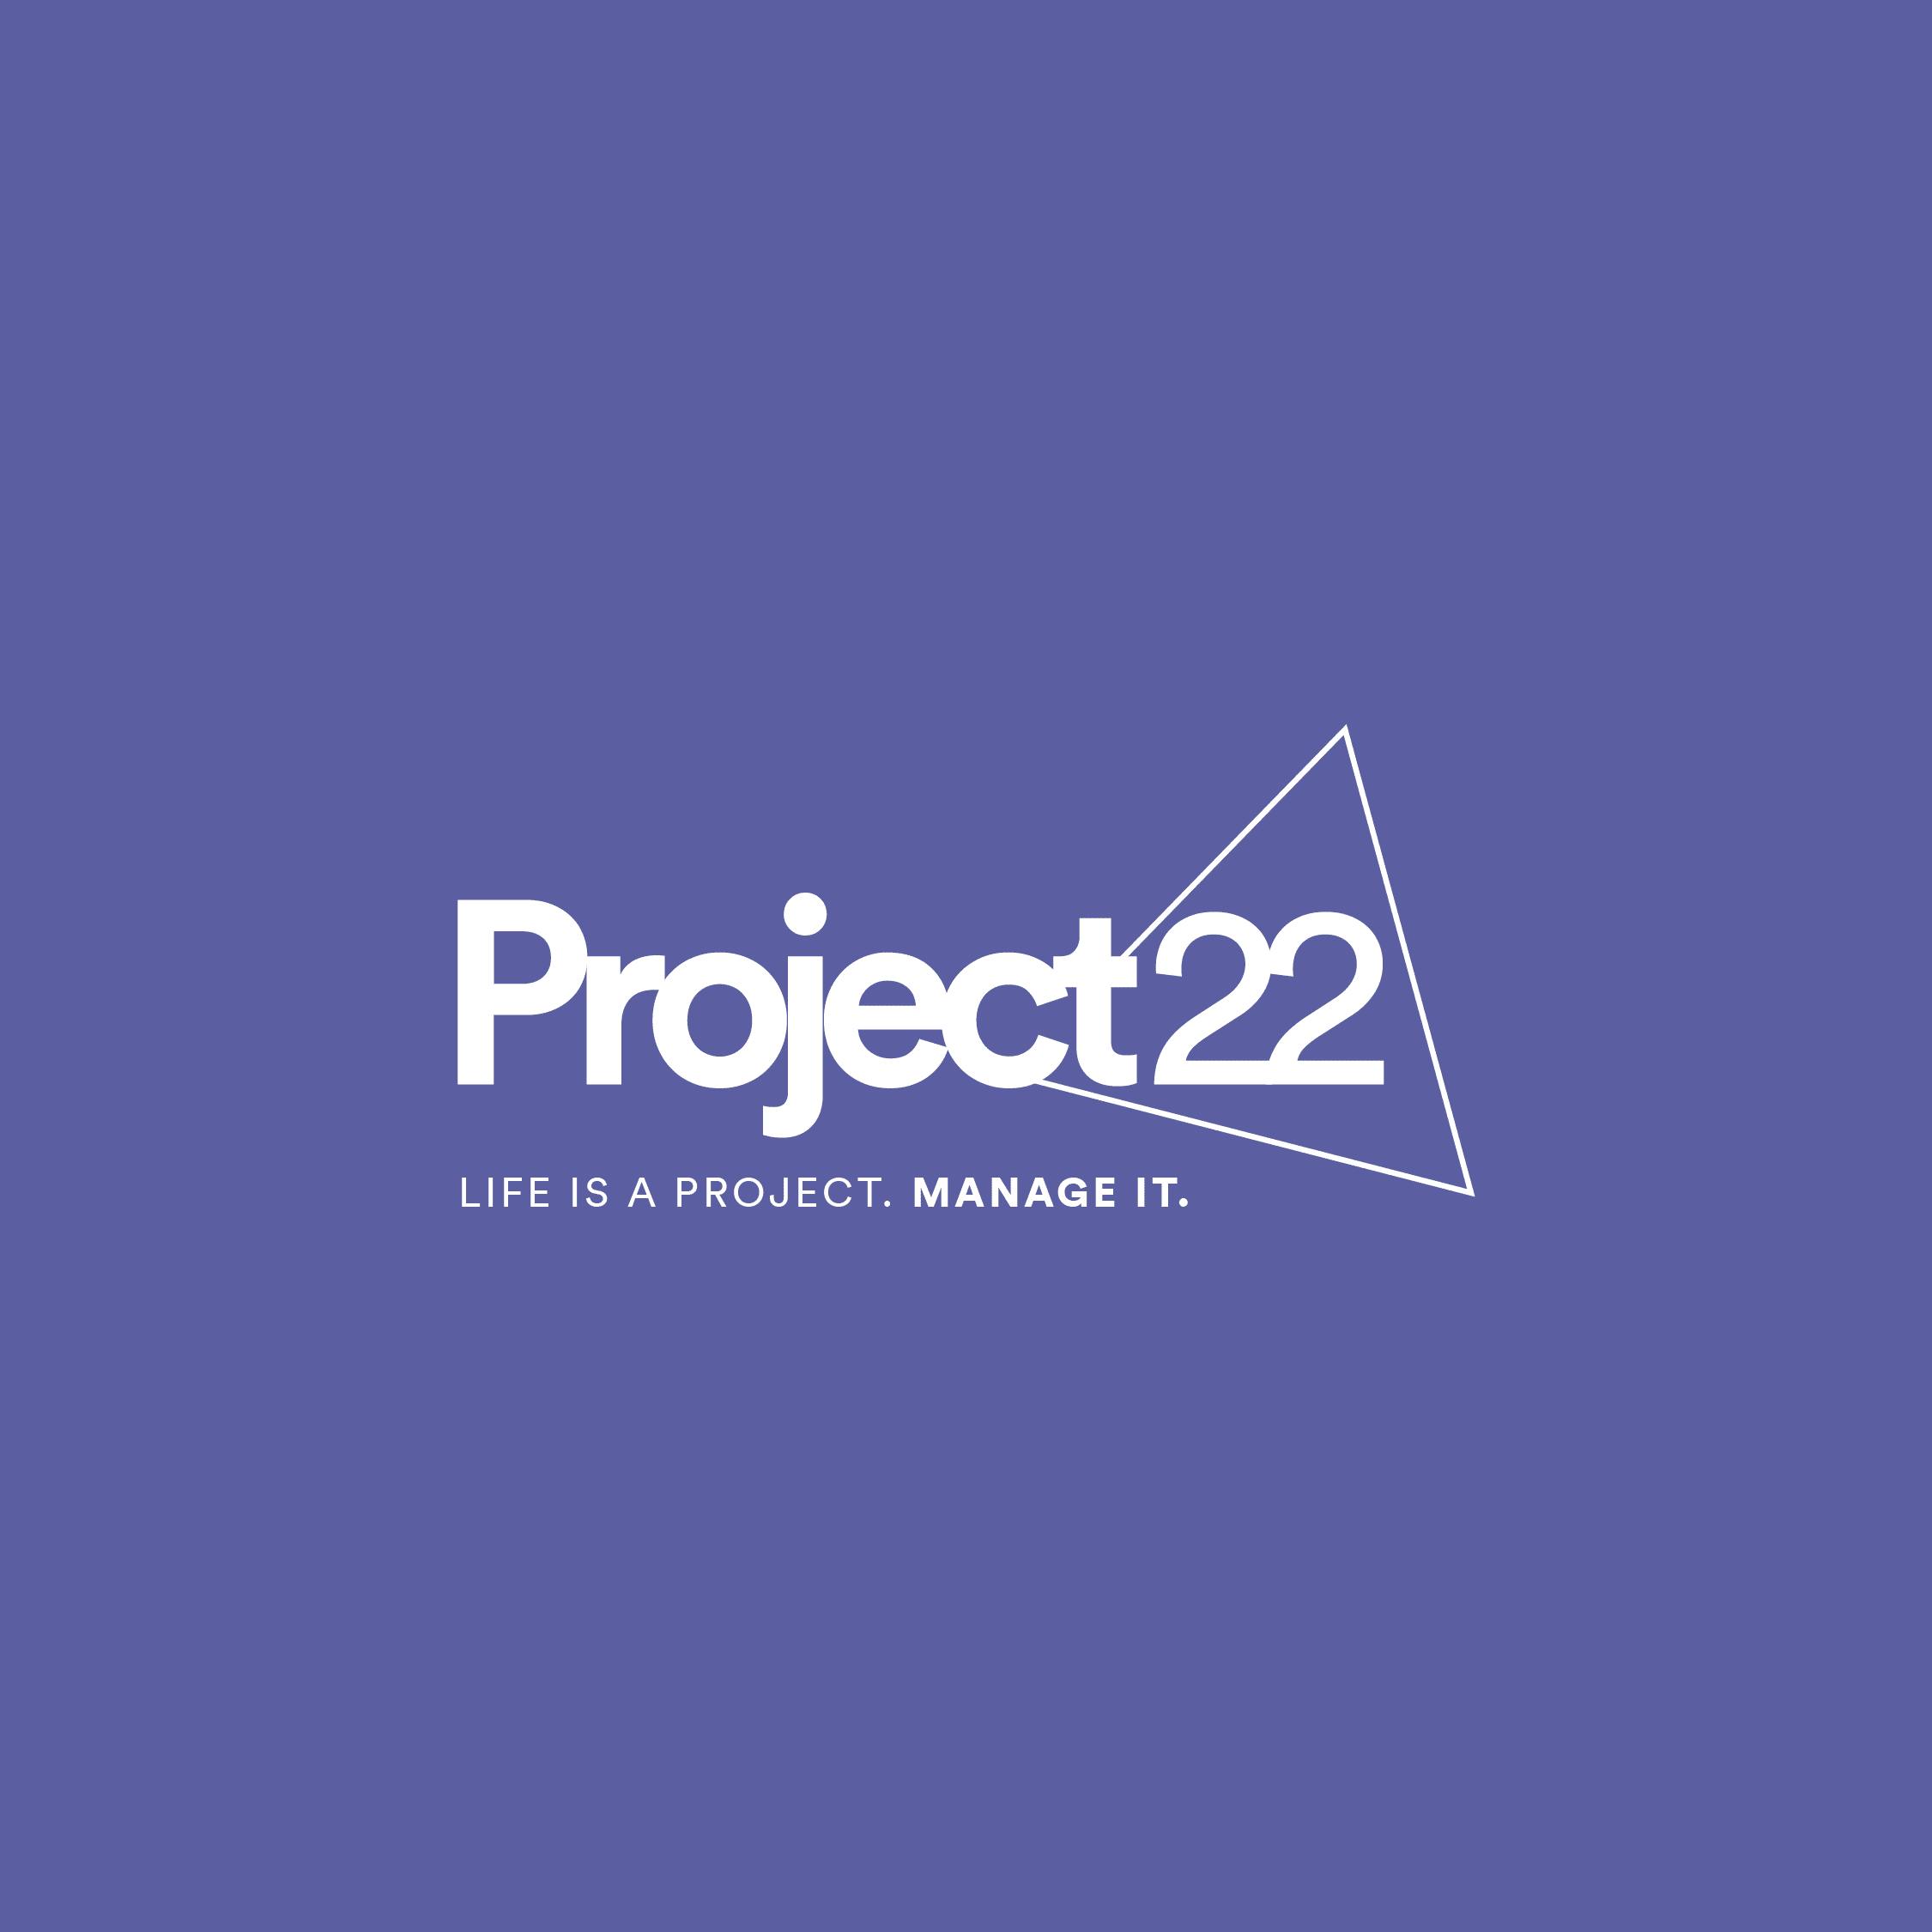 ACJ AIMS Project 22